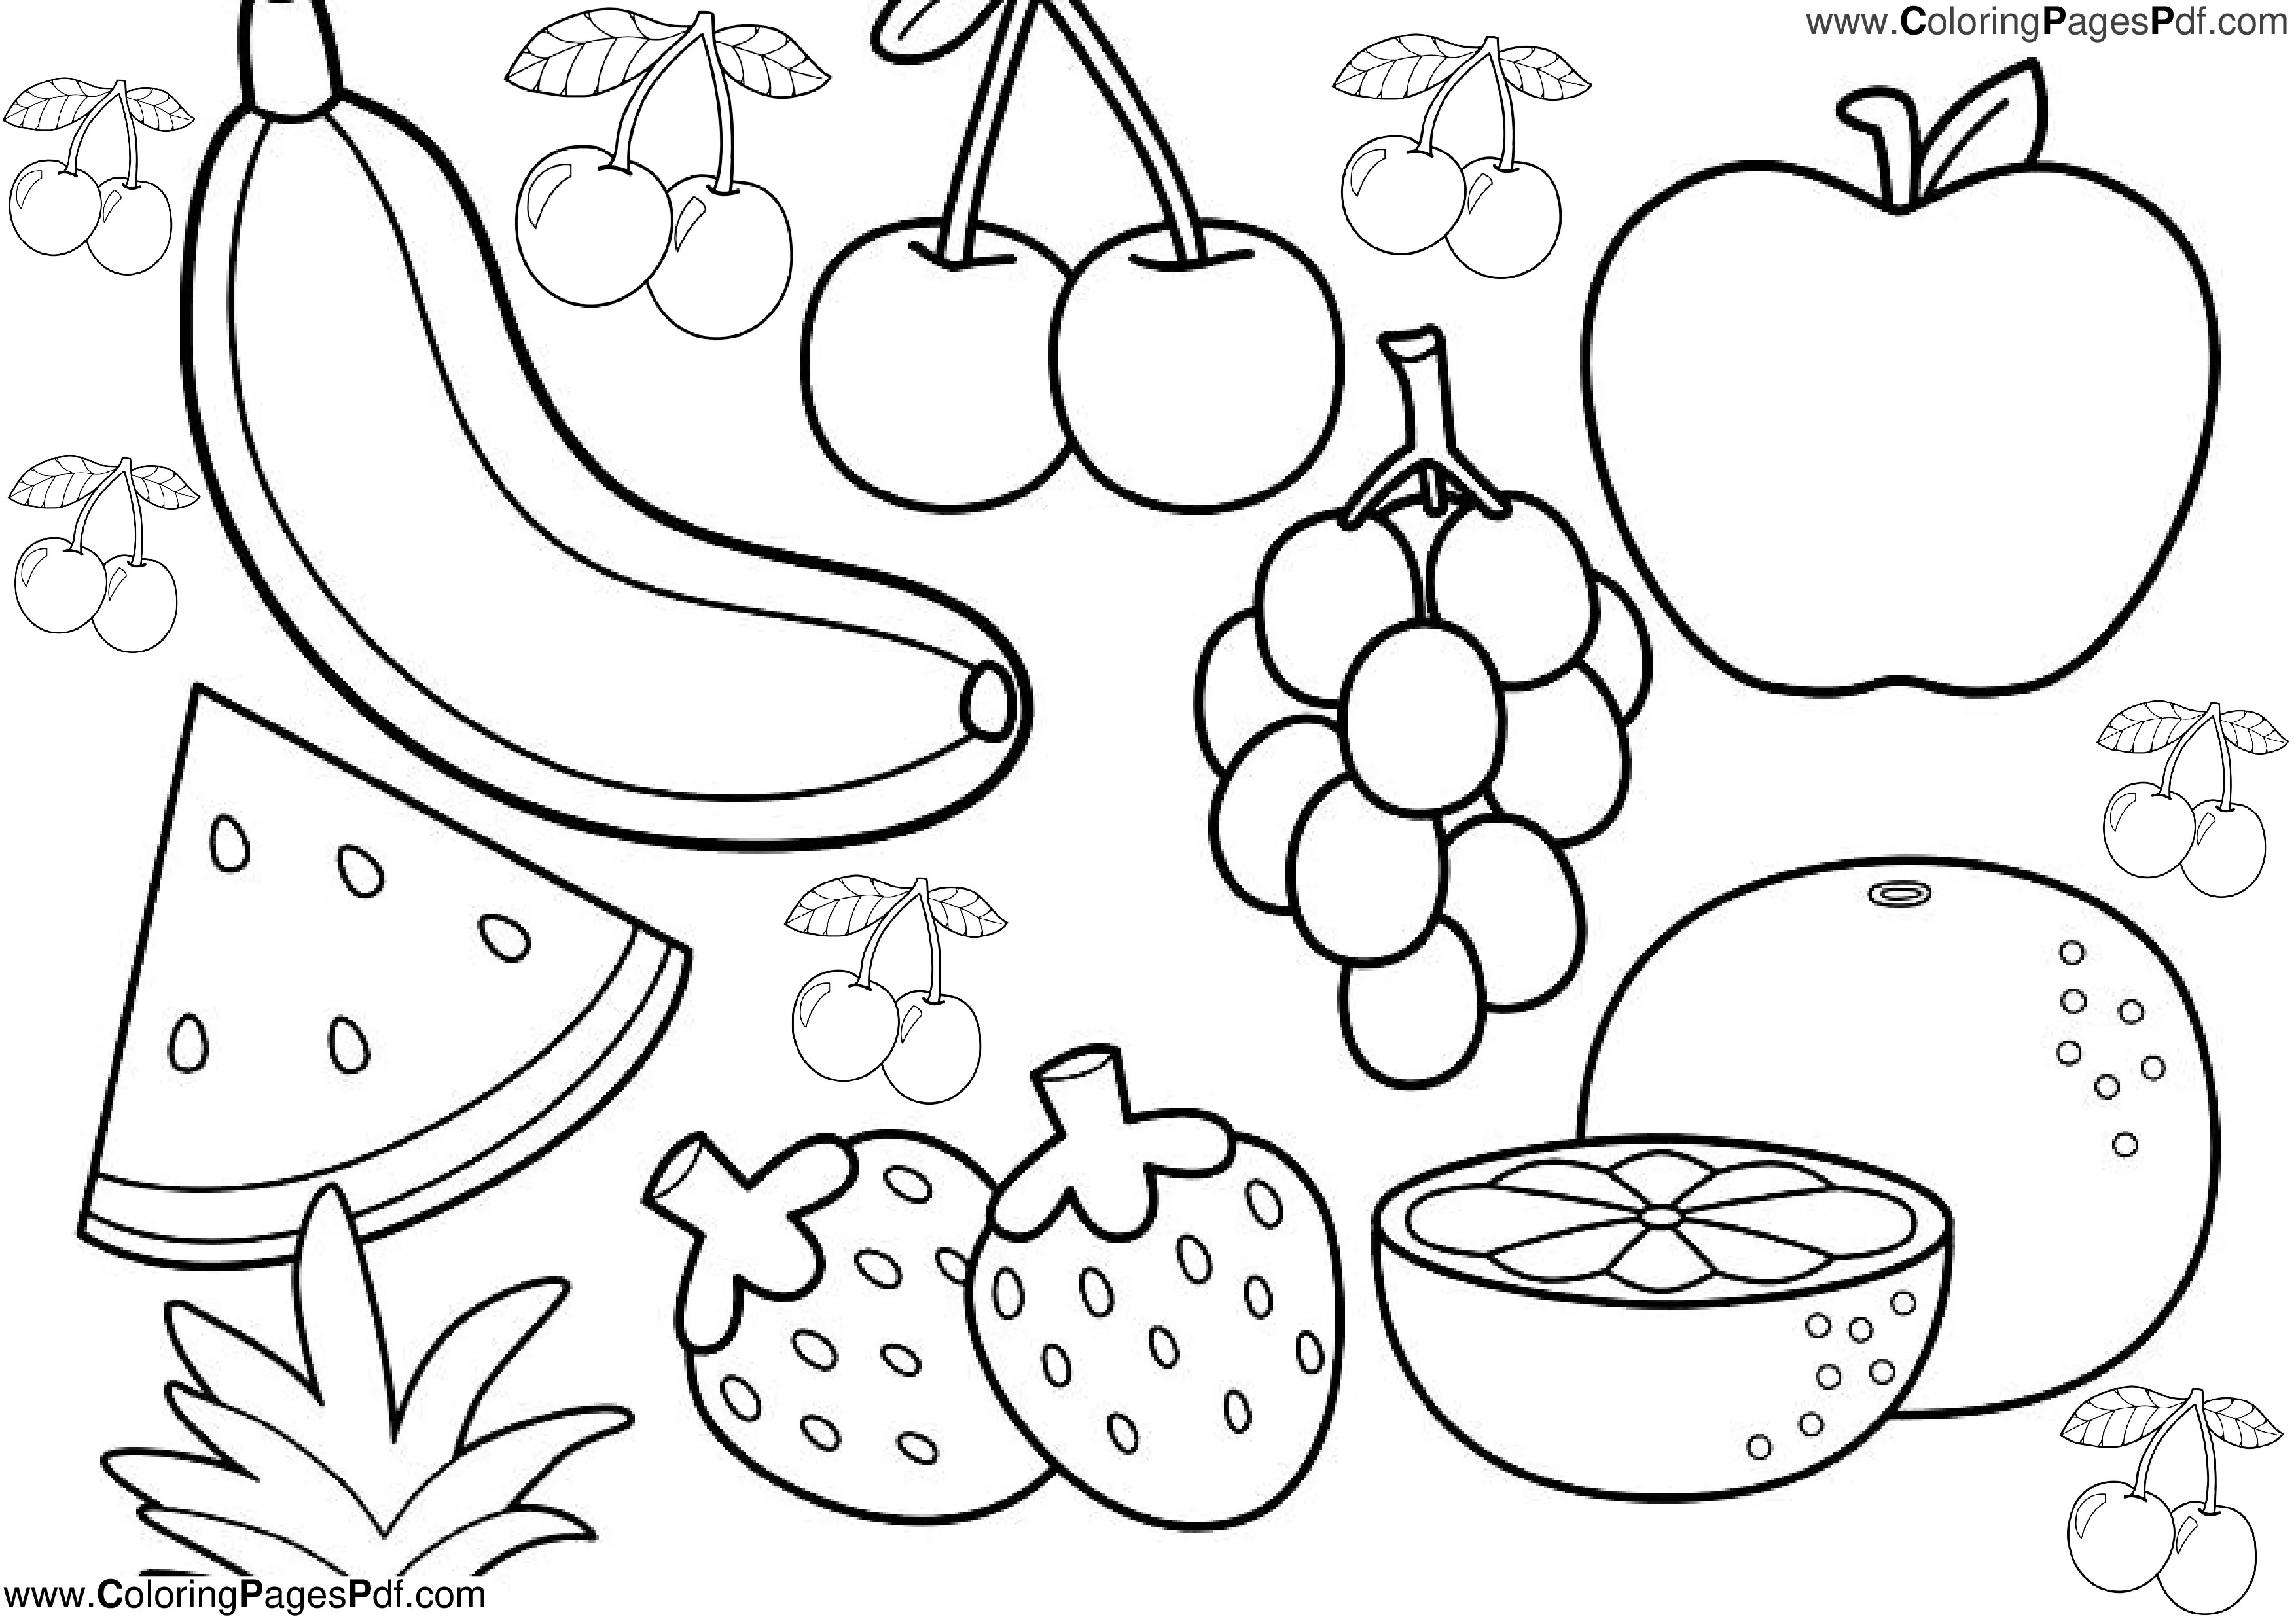 Top fruit coloring pages